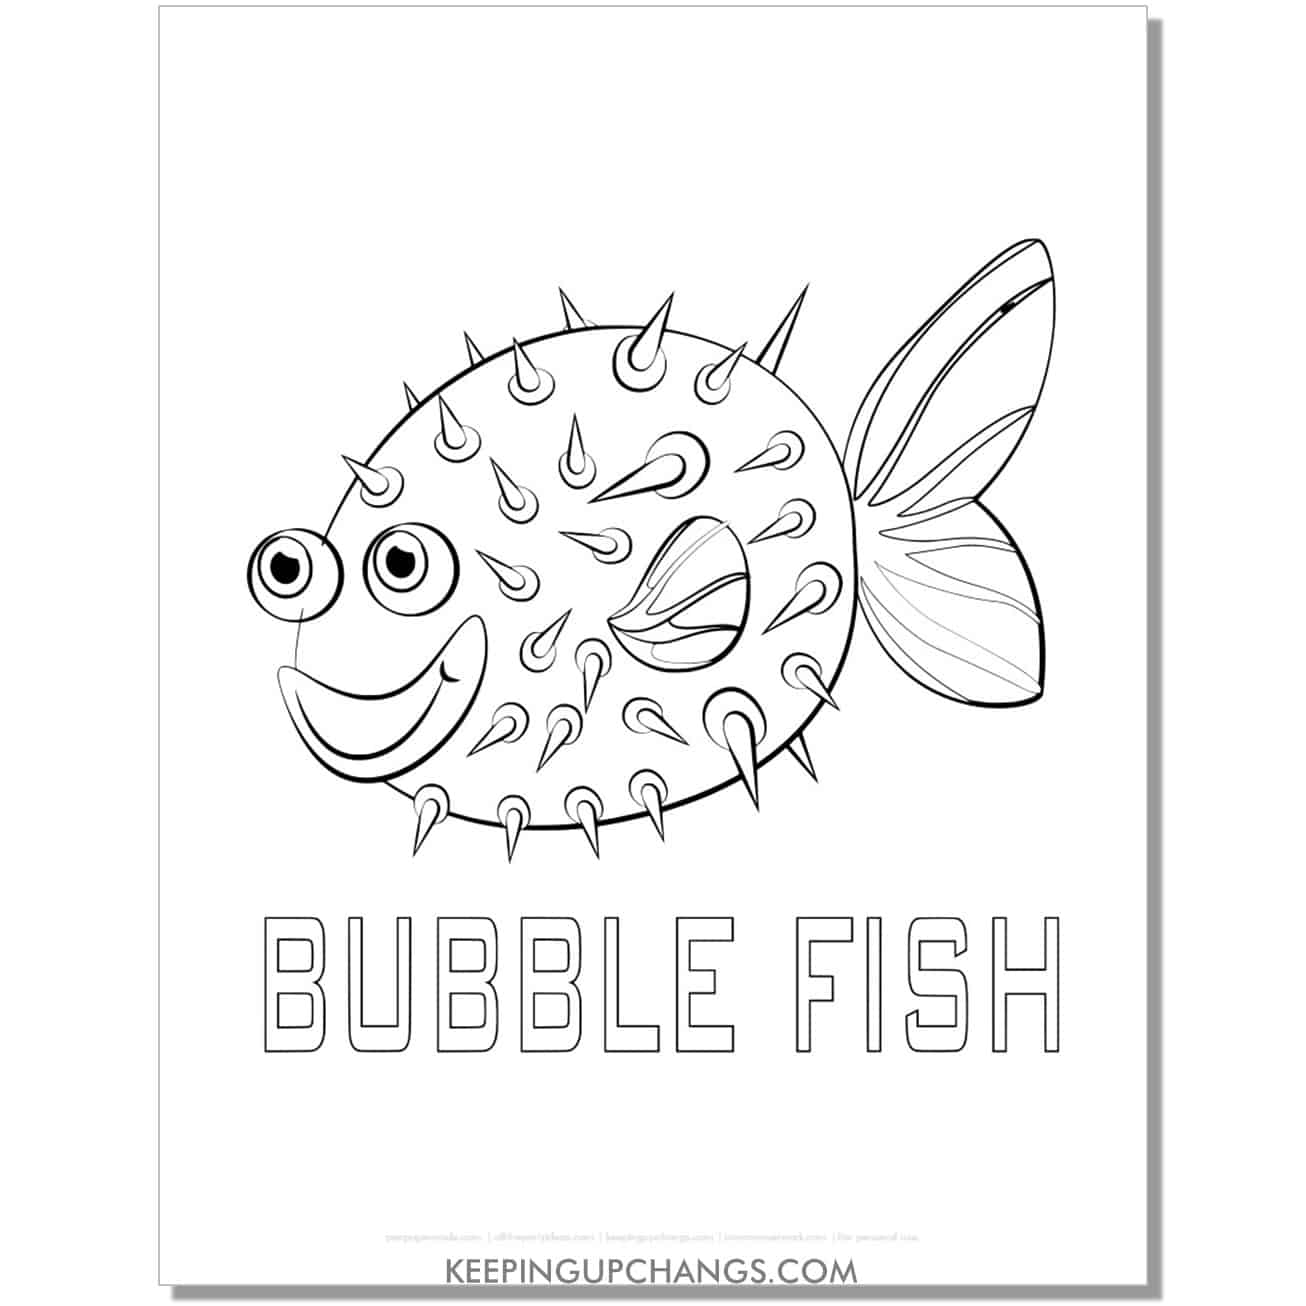 free bubble fish word coloring page, sheet.